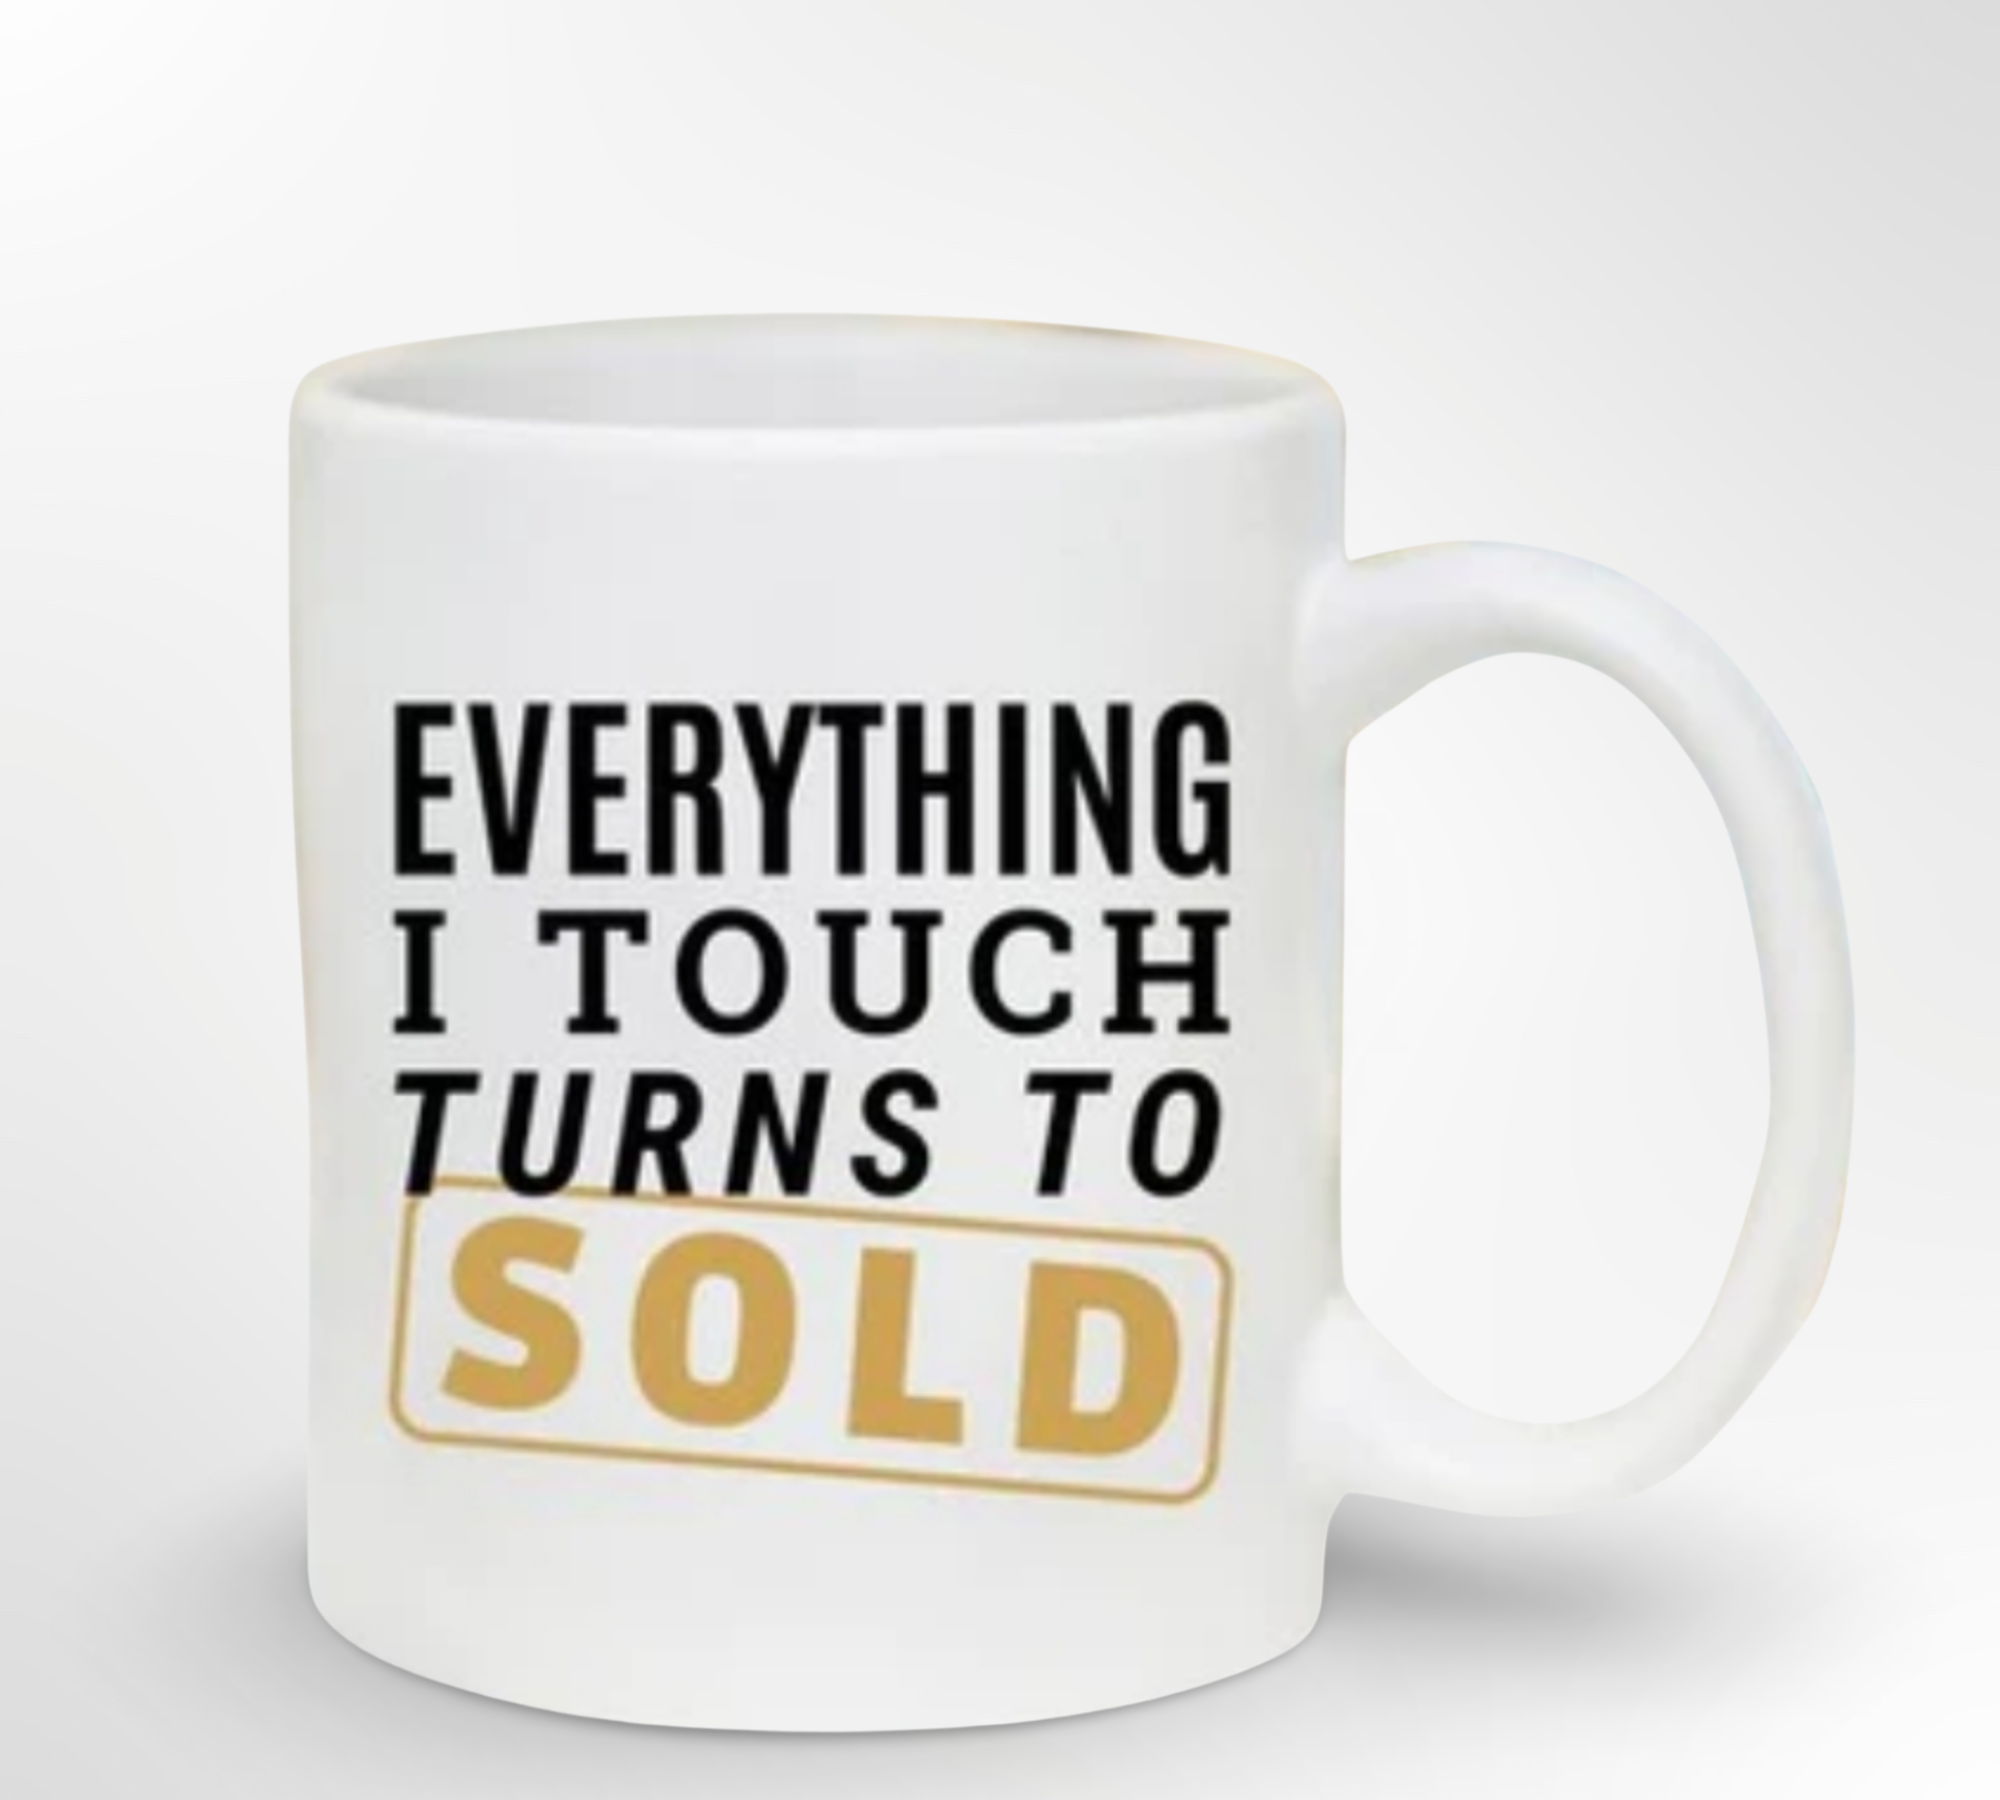 Coffee Mug - Everything I touch turns to sold